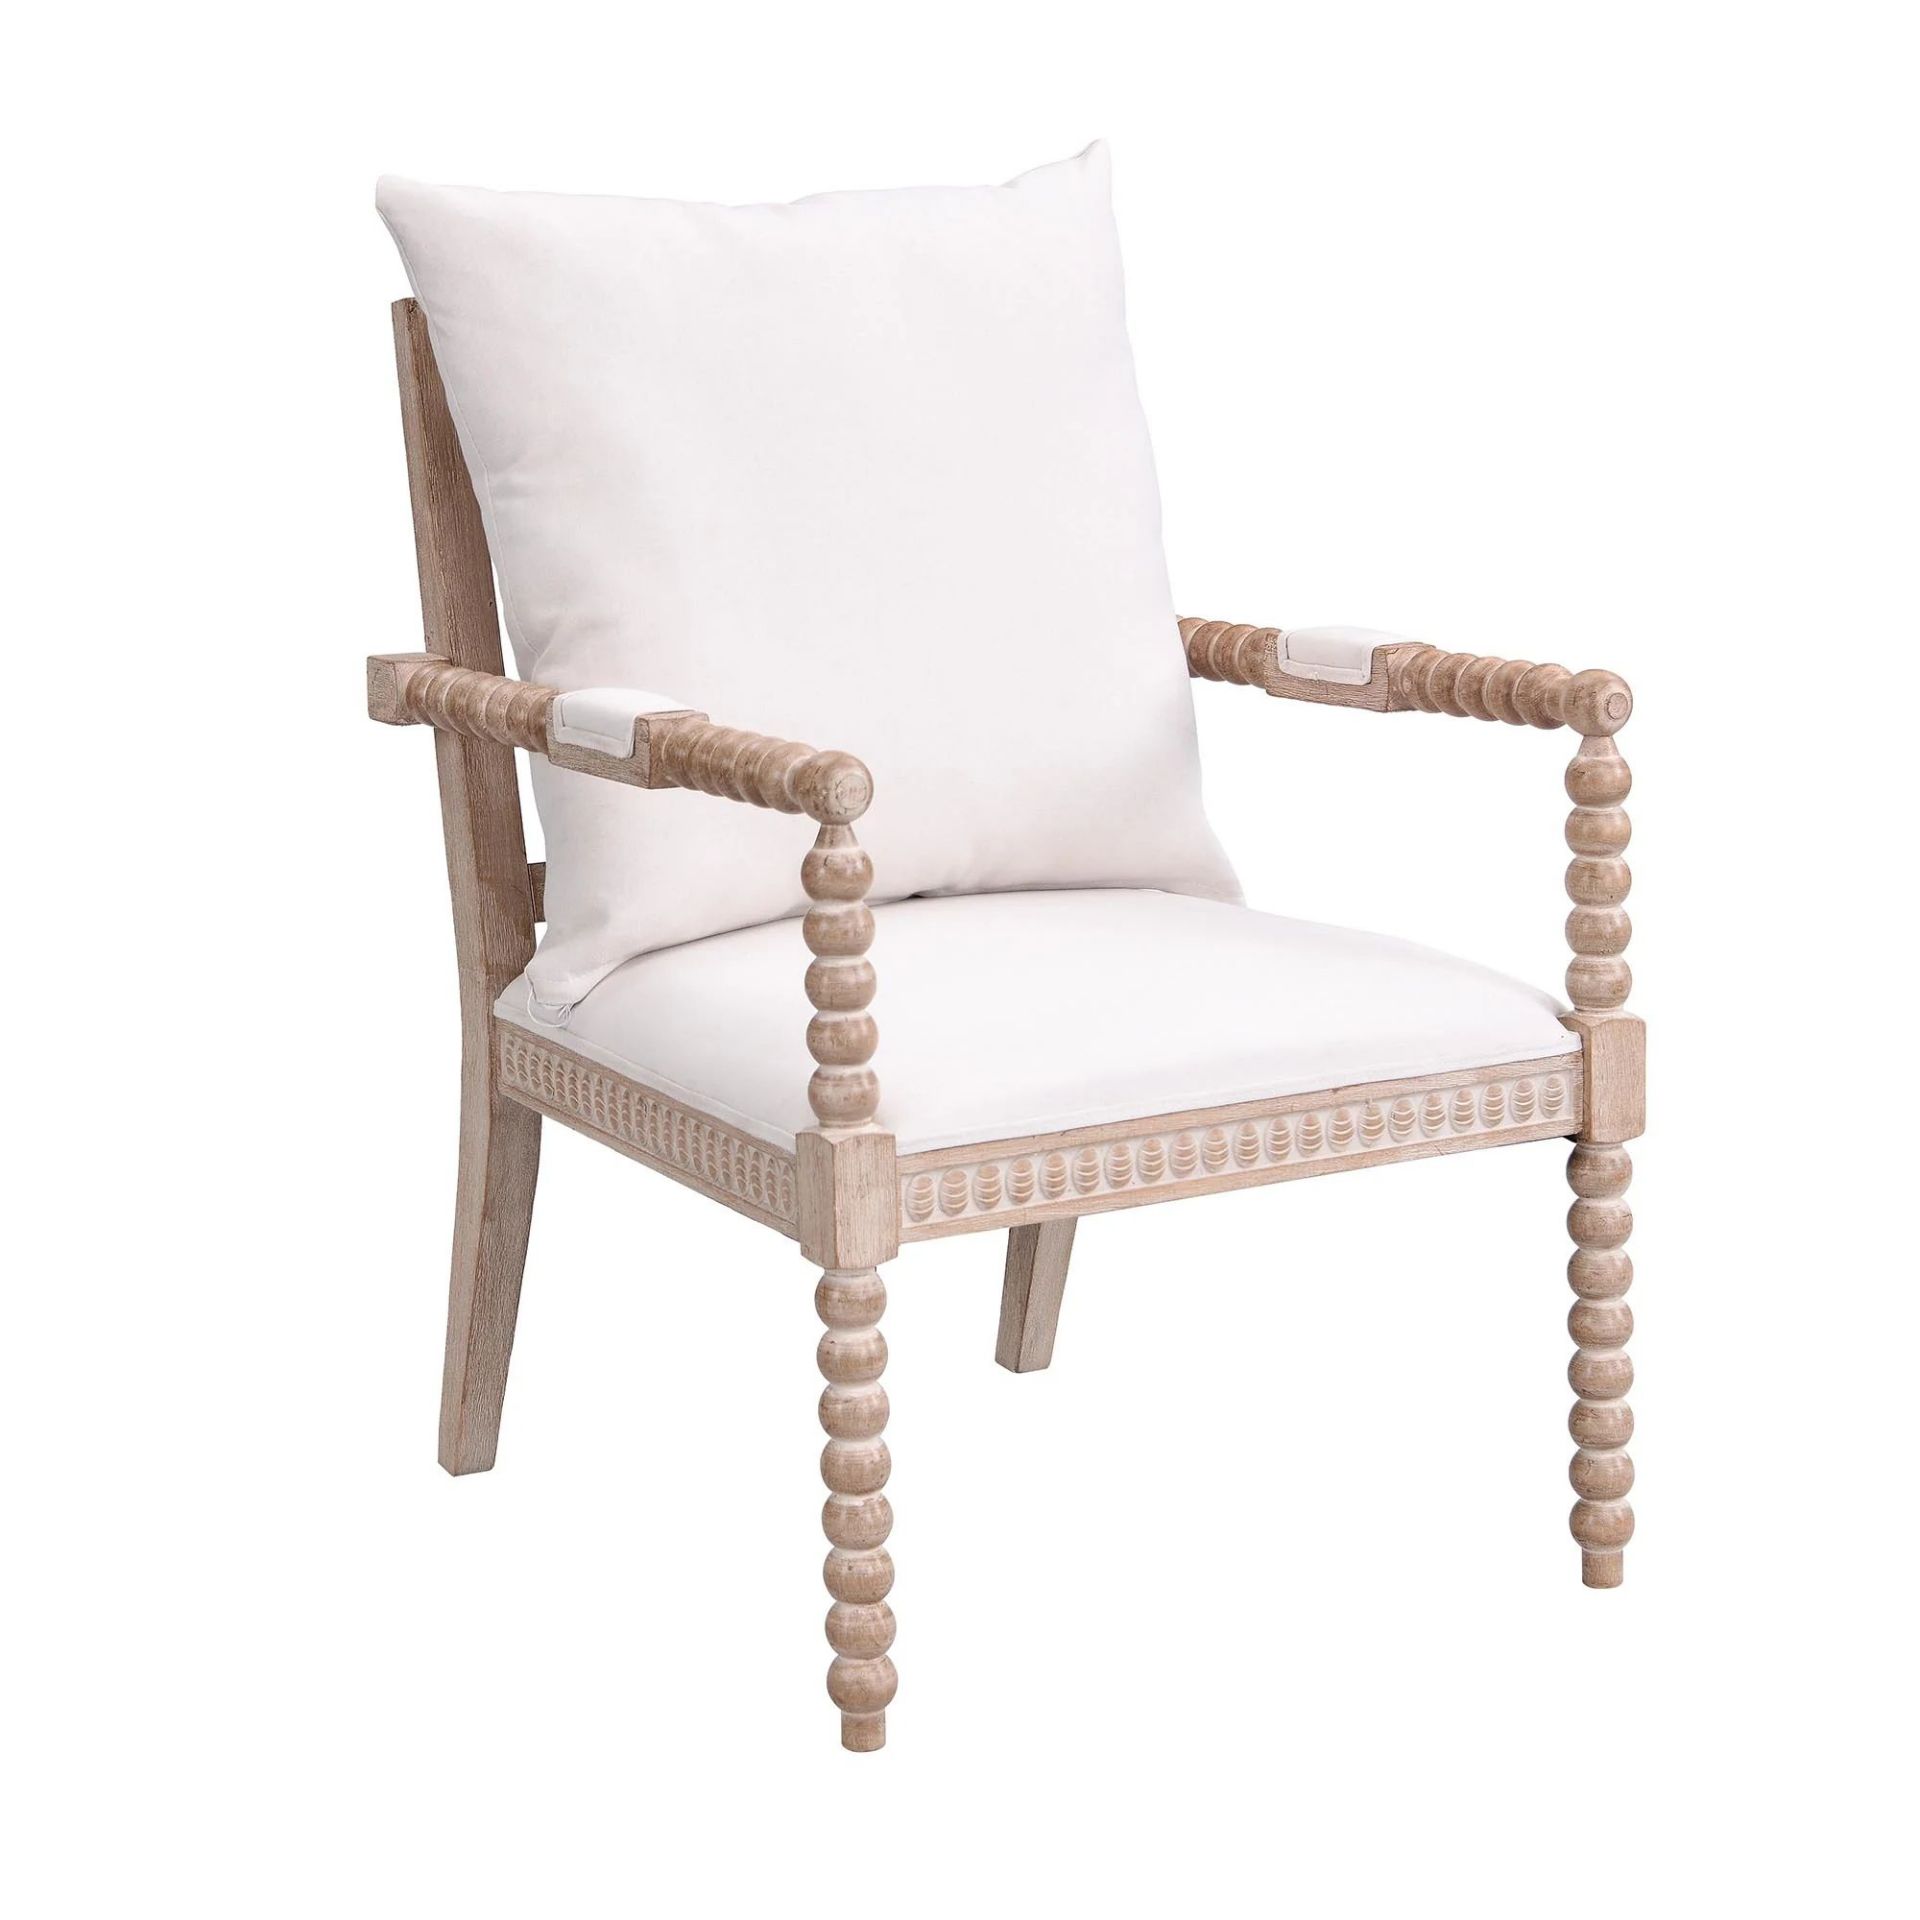 Hemingford Beige Fabric Bobbin Armchair. - ER30. RRP £299.99. Inspired by the 17th century style, - Image 2 of 2